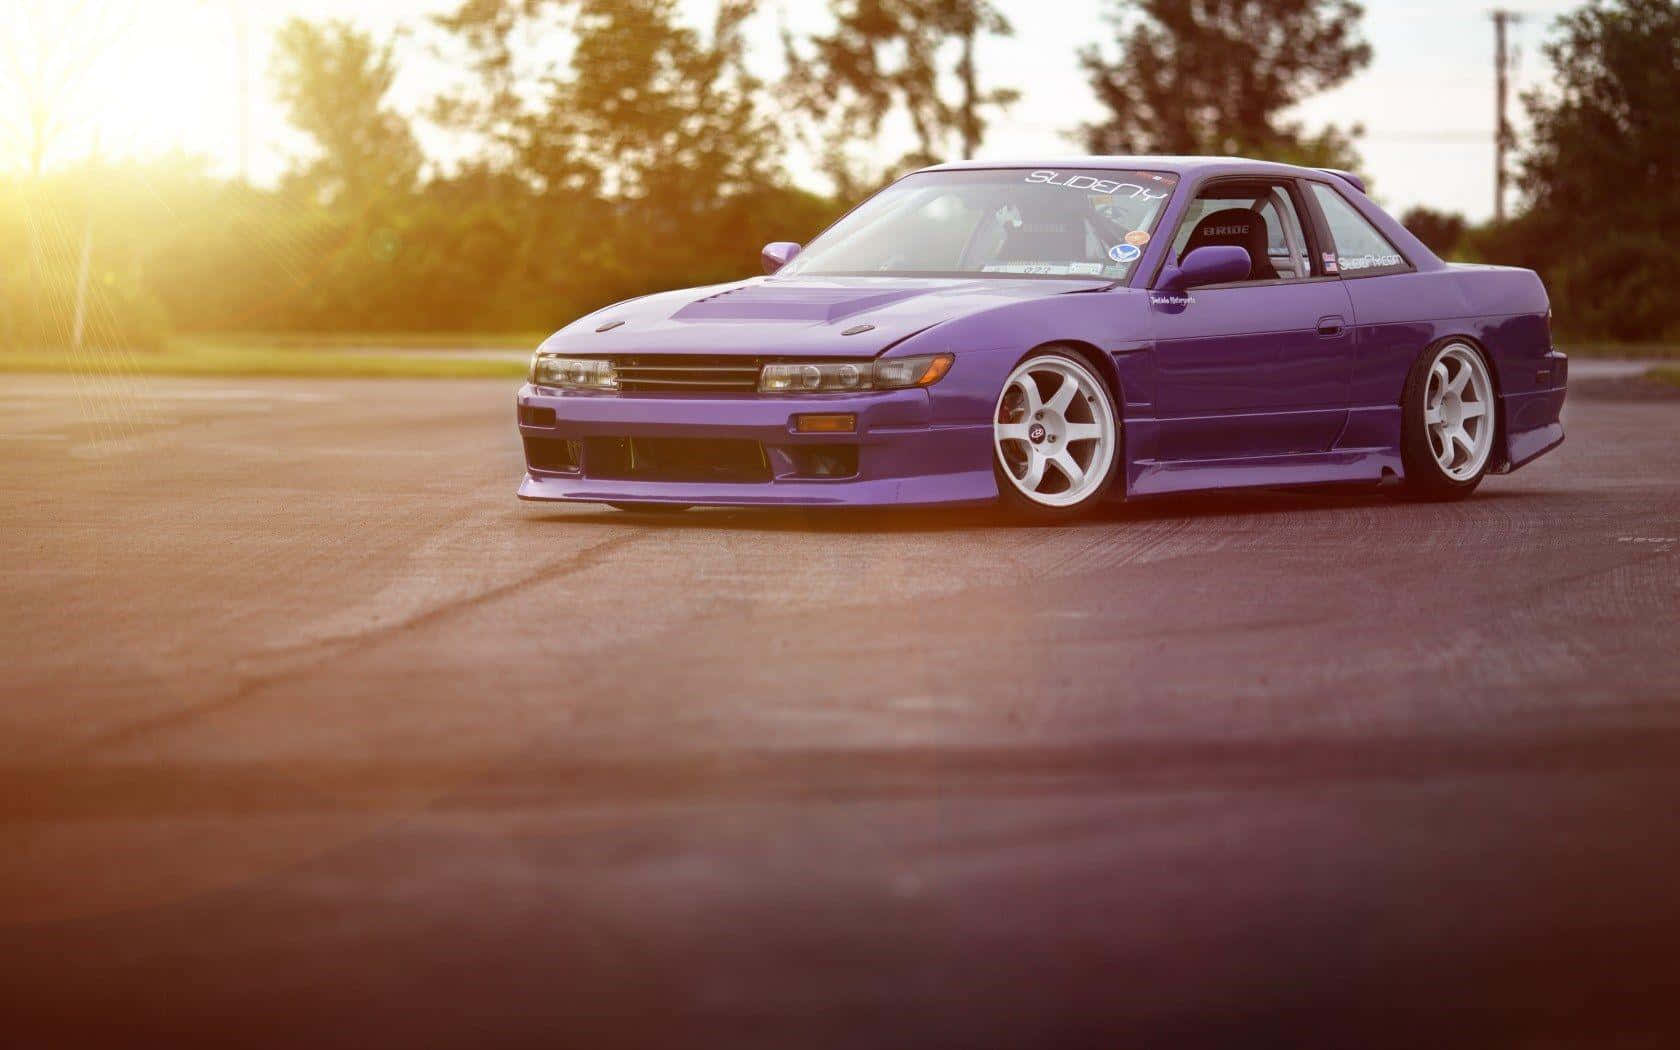 Nissan Silvia S13 - The Iconic Japanese Sport Coupe Wallpaper